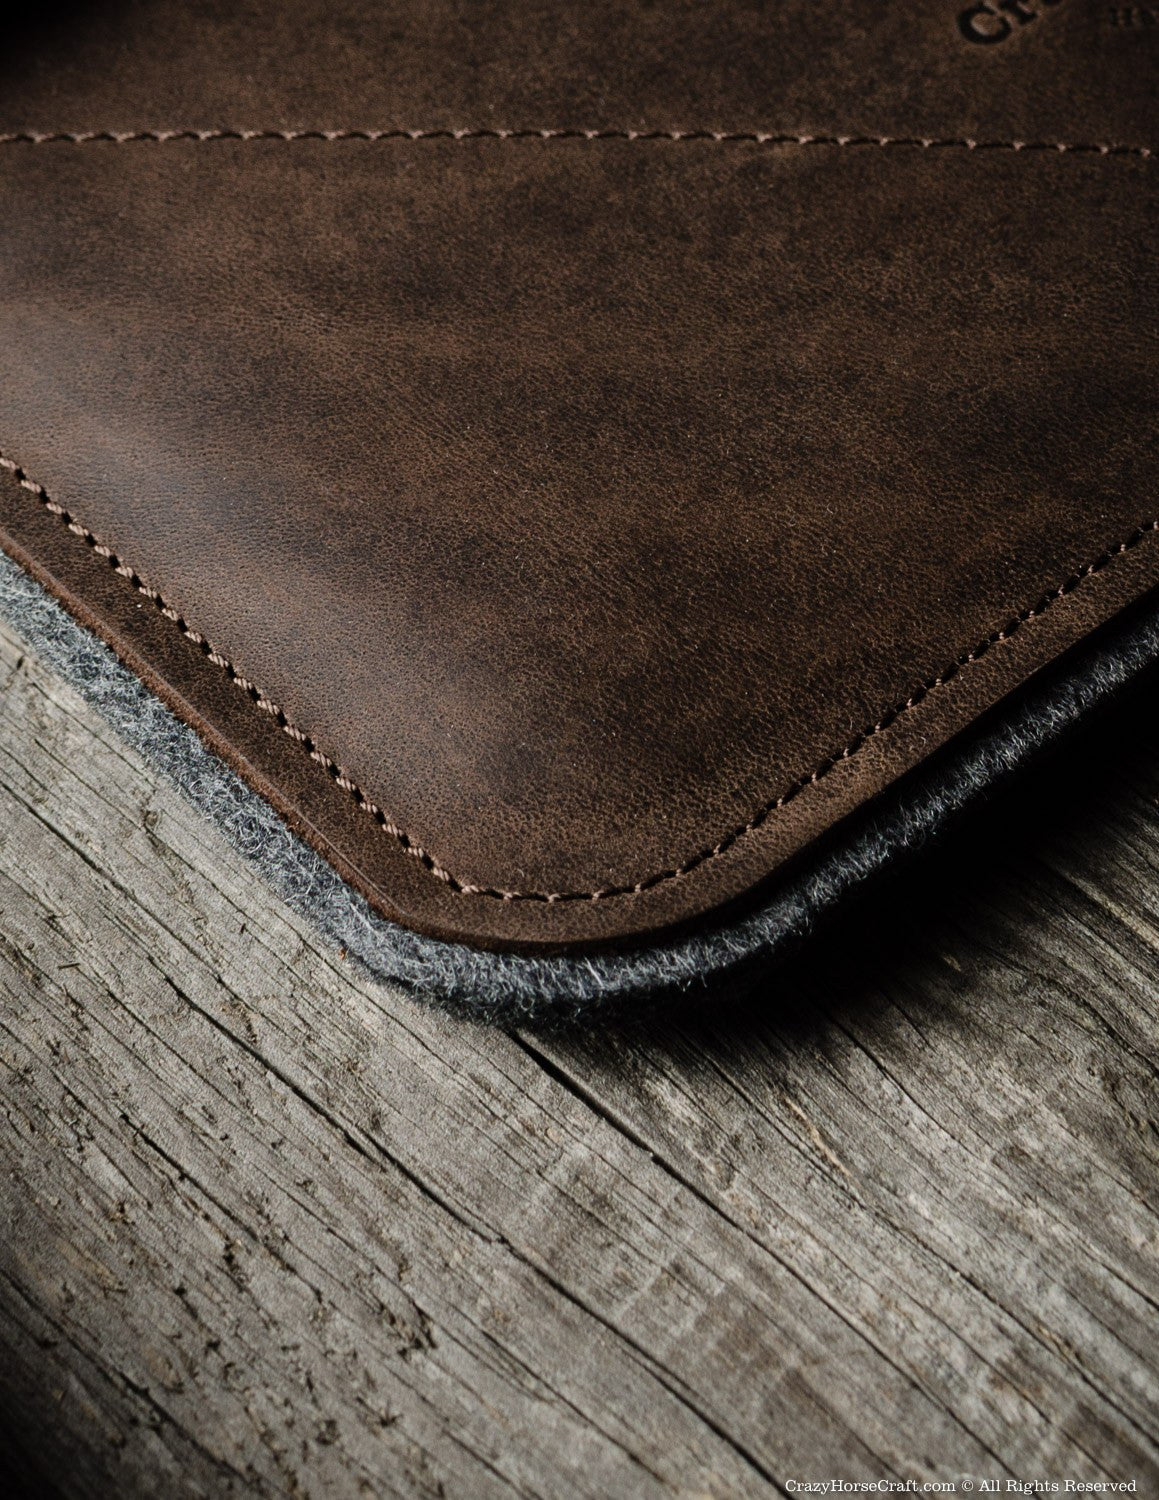 Leather iPad Case details front